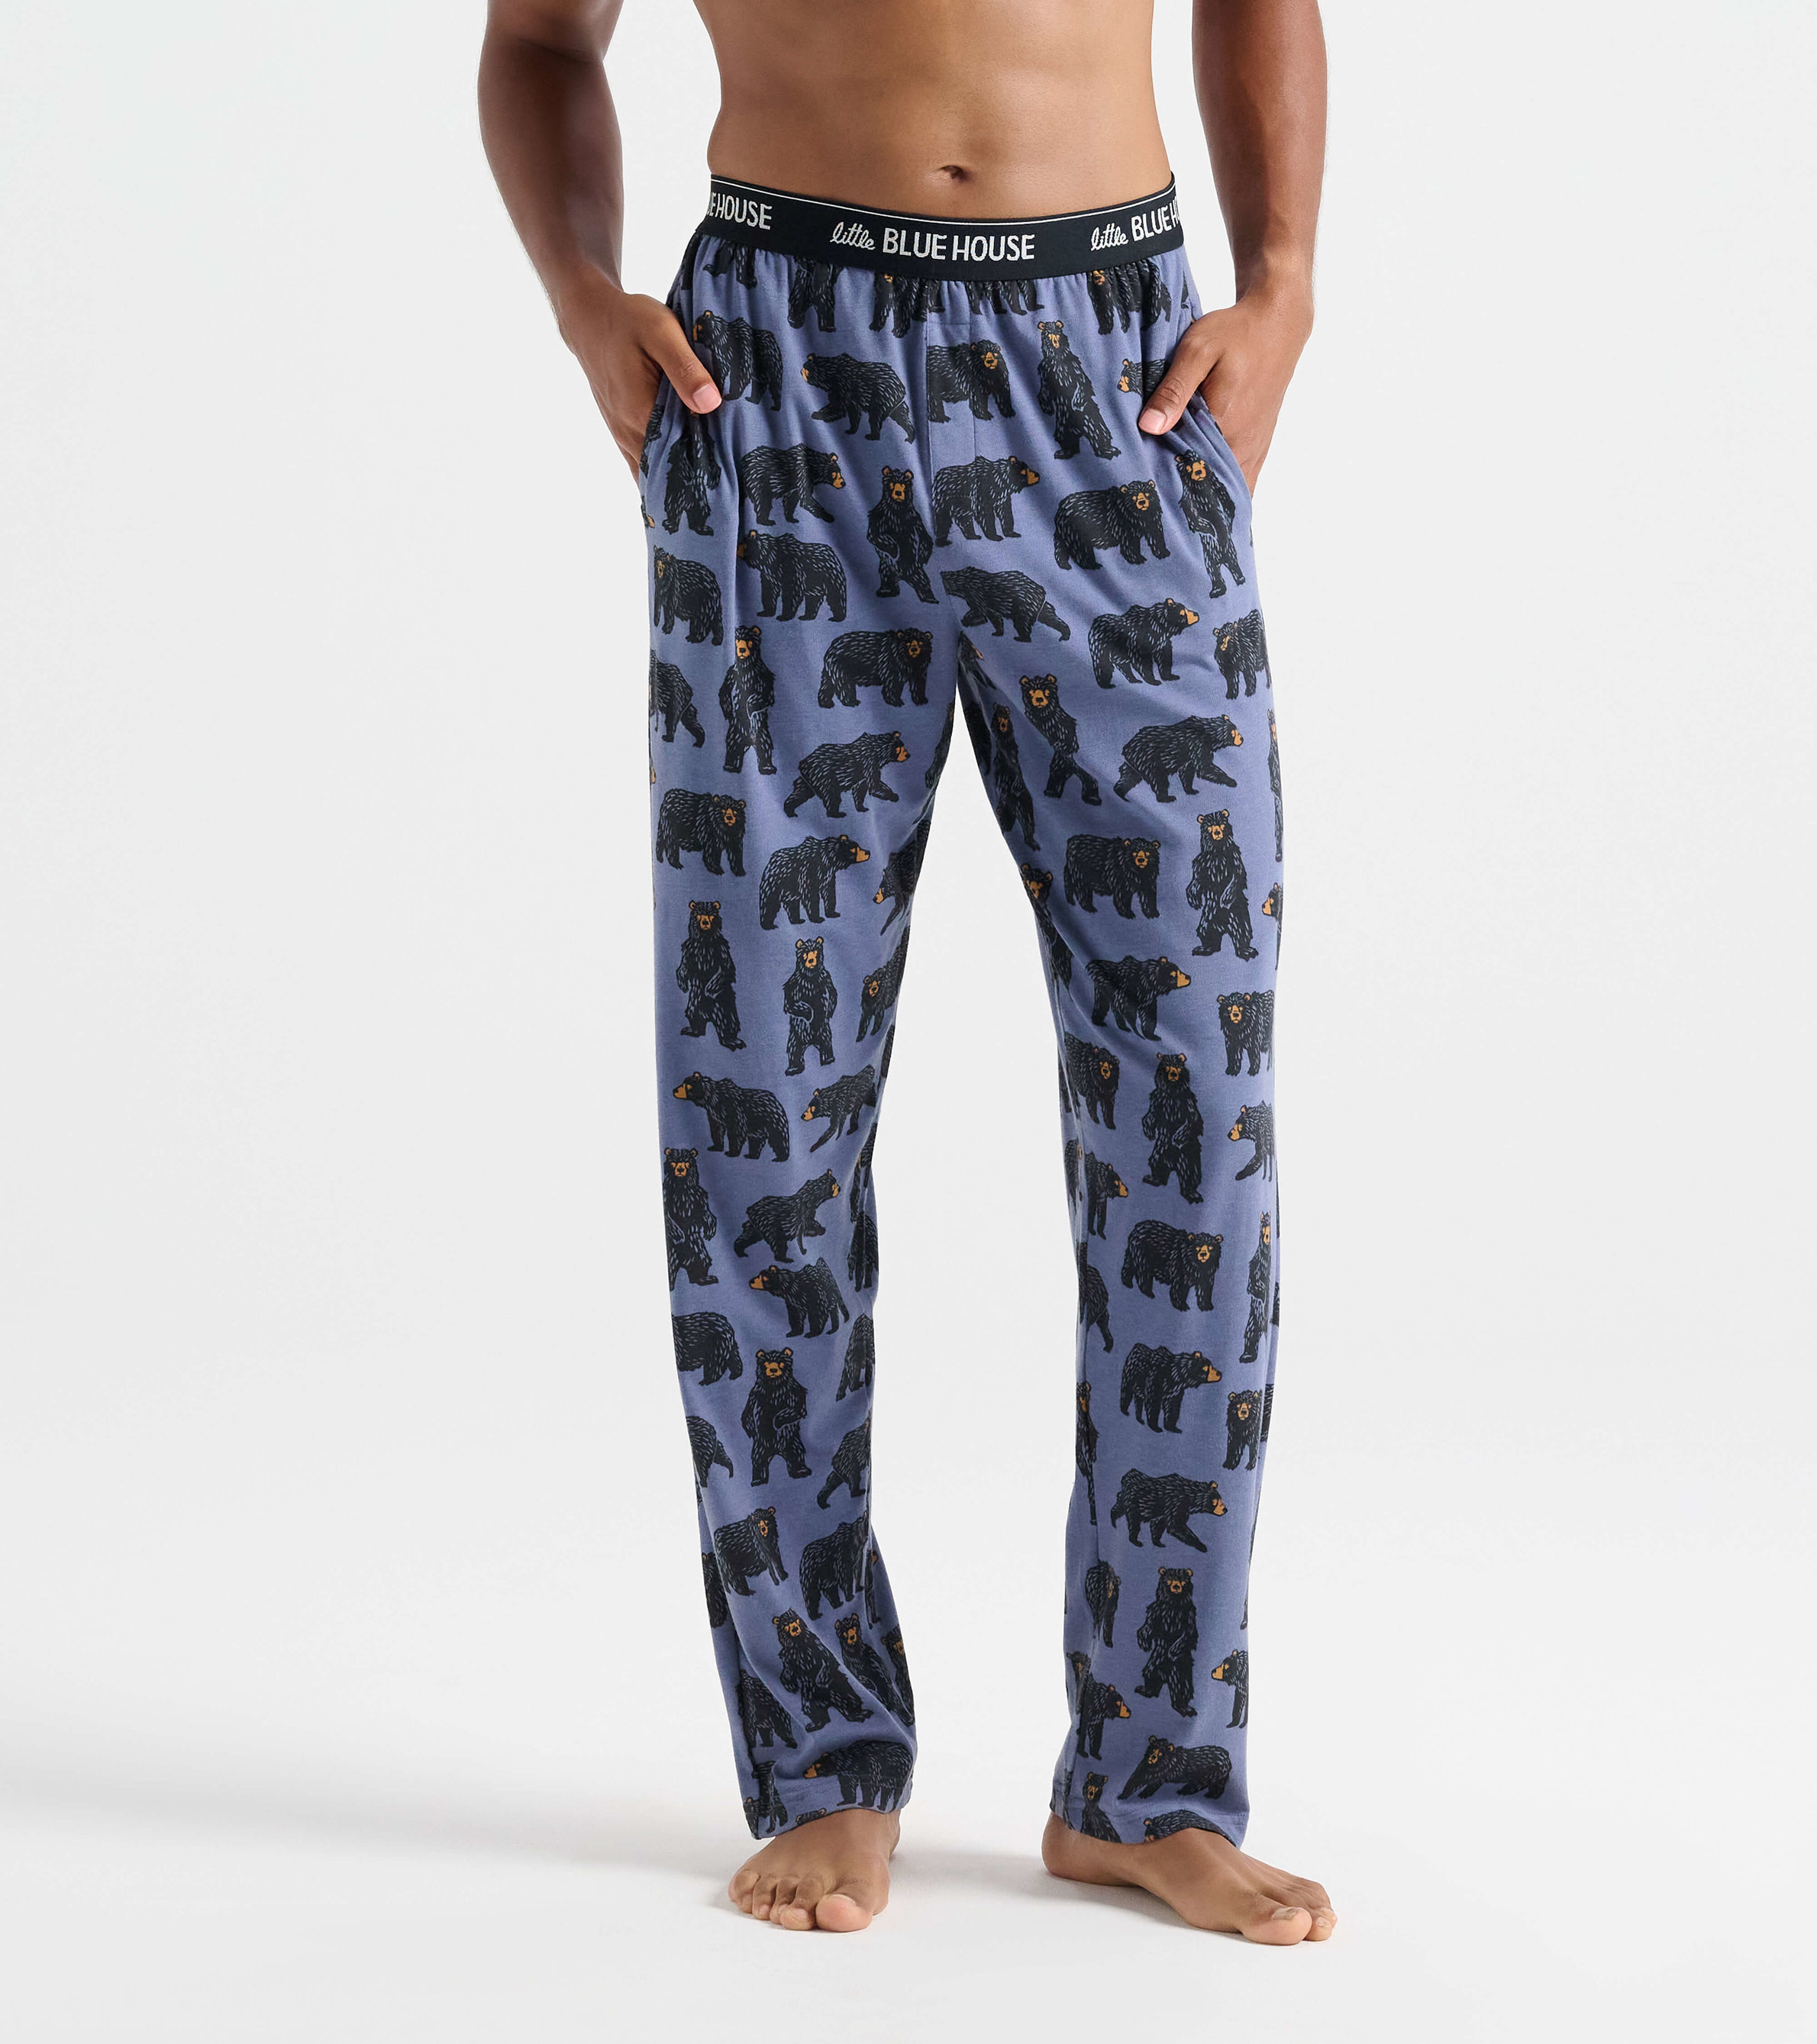 Stay Wild Men's Tee and Pants Pajama Separates - Little Blue House US